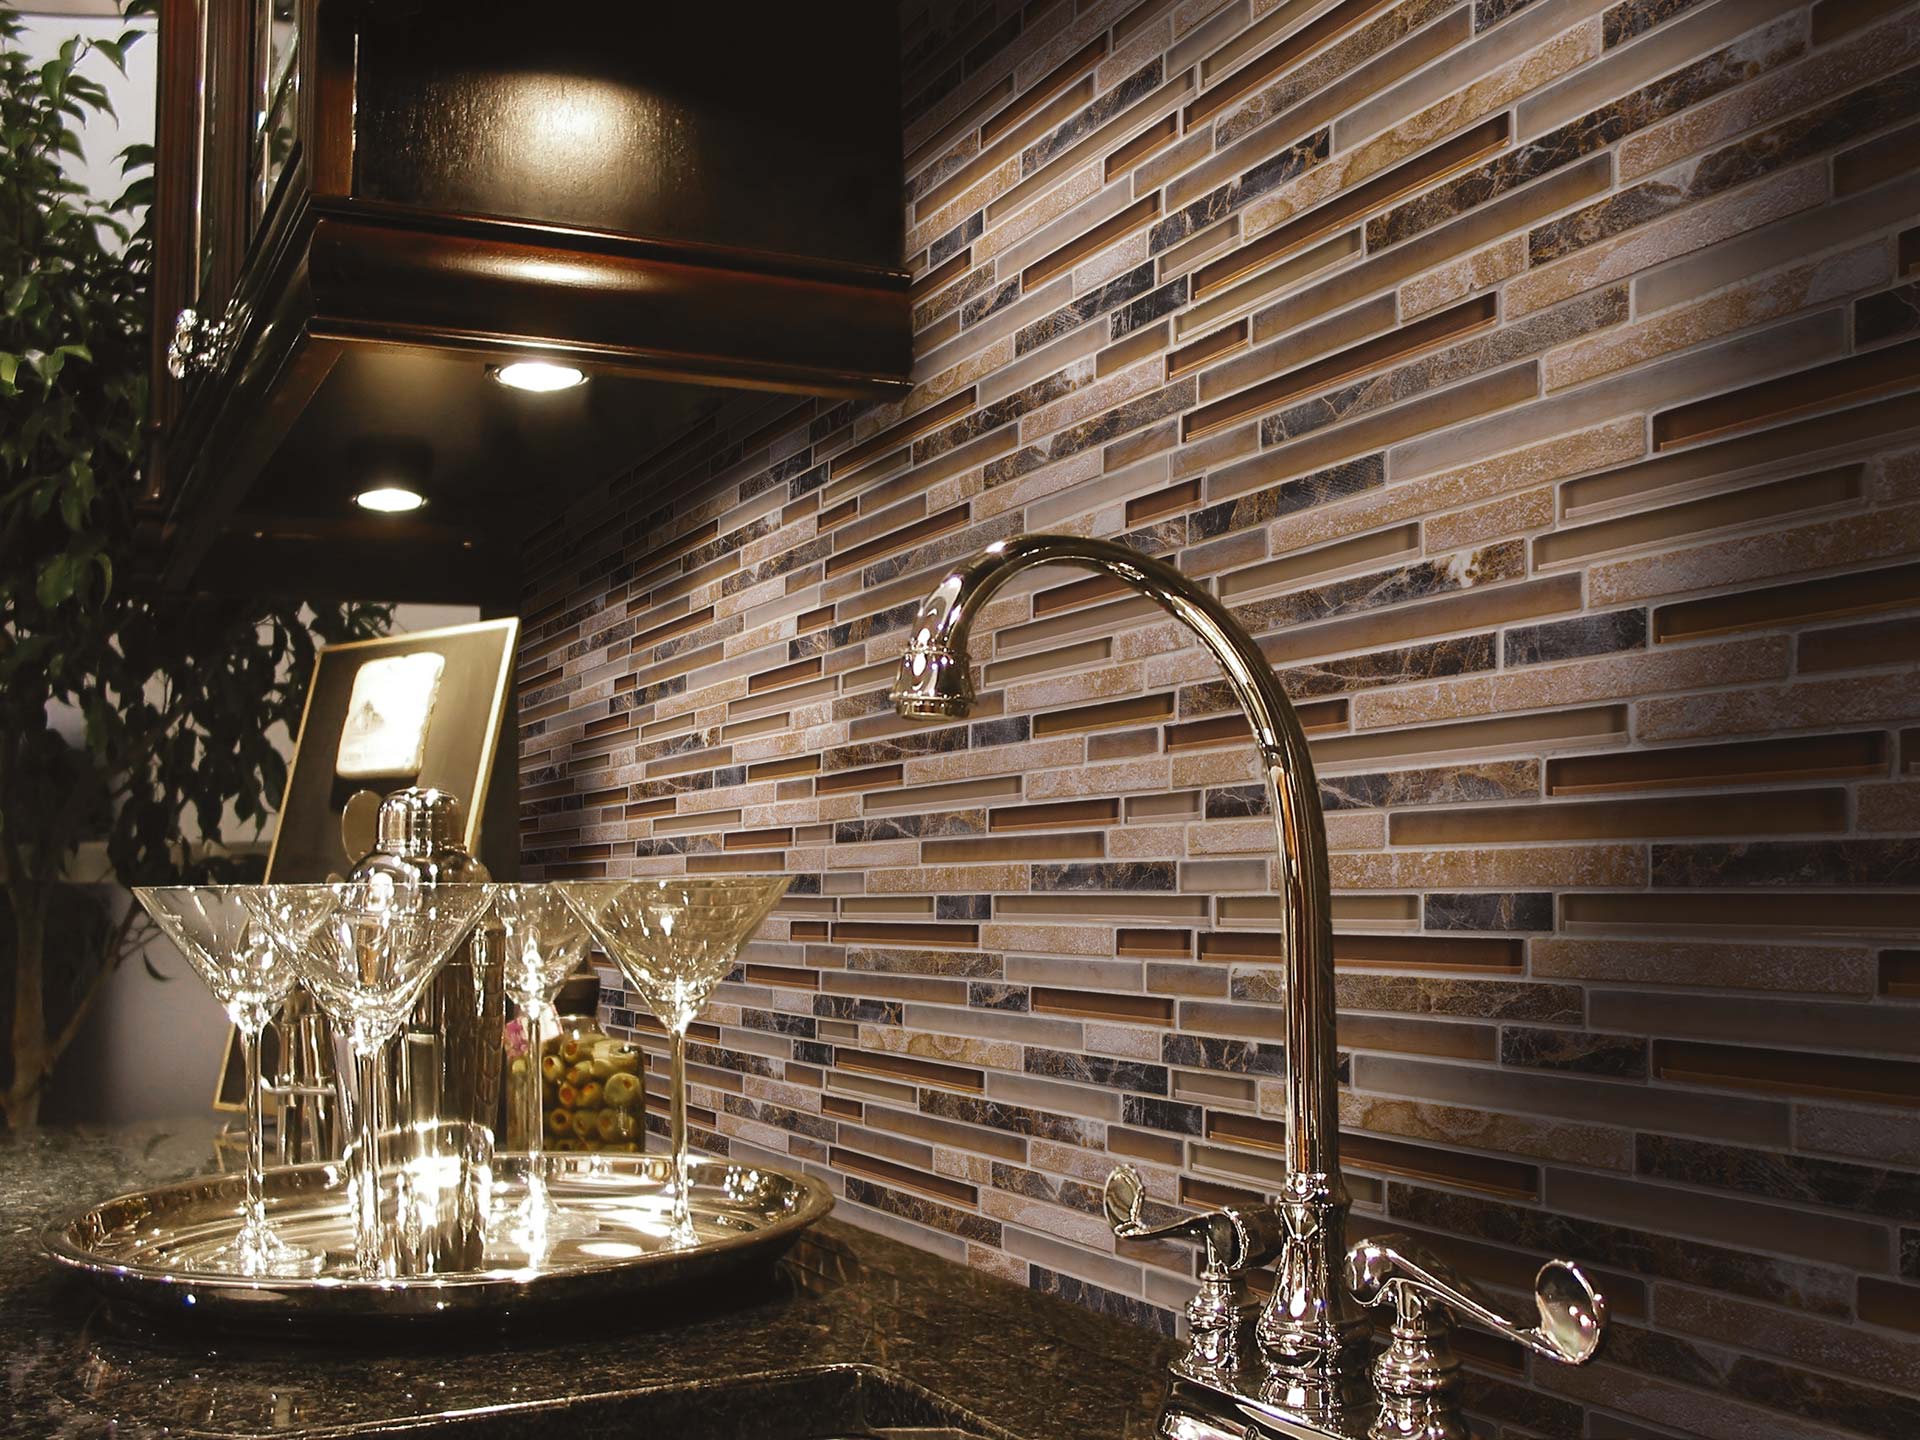 Buy American Florim Tiles Online | The Iced Rocks Collection ...